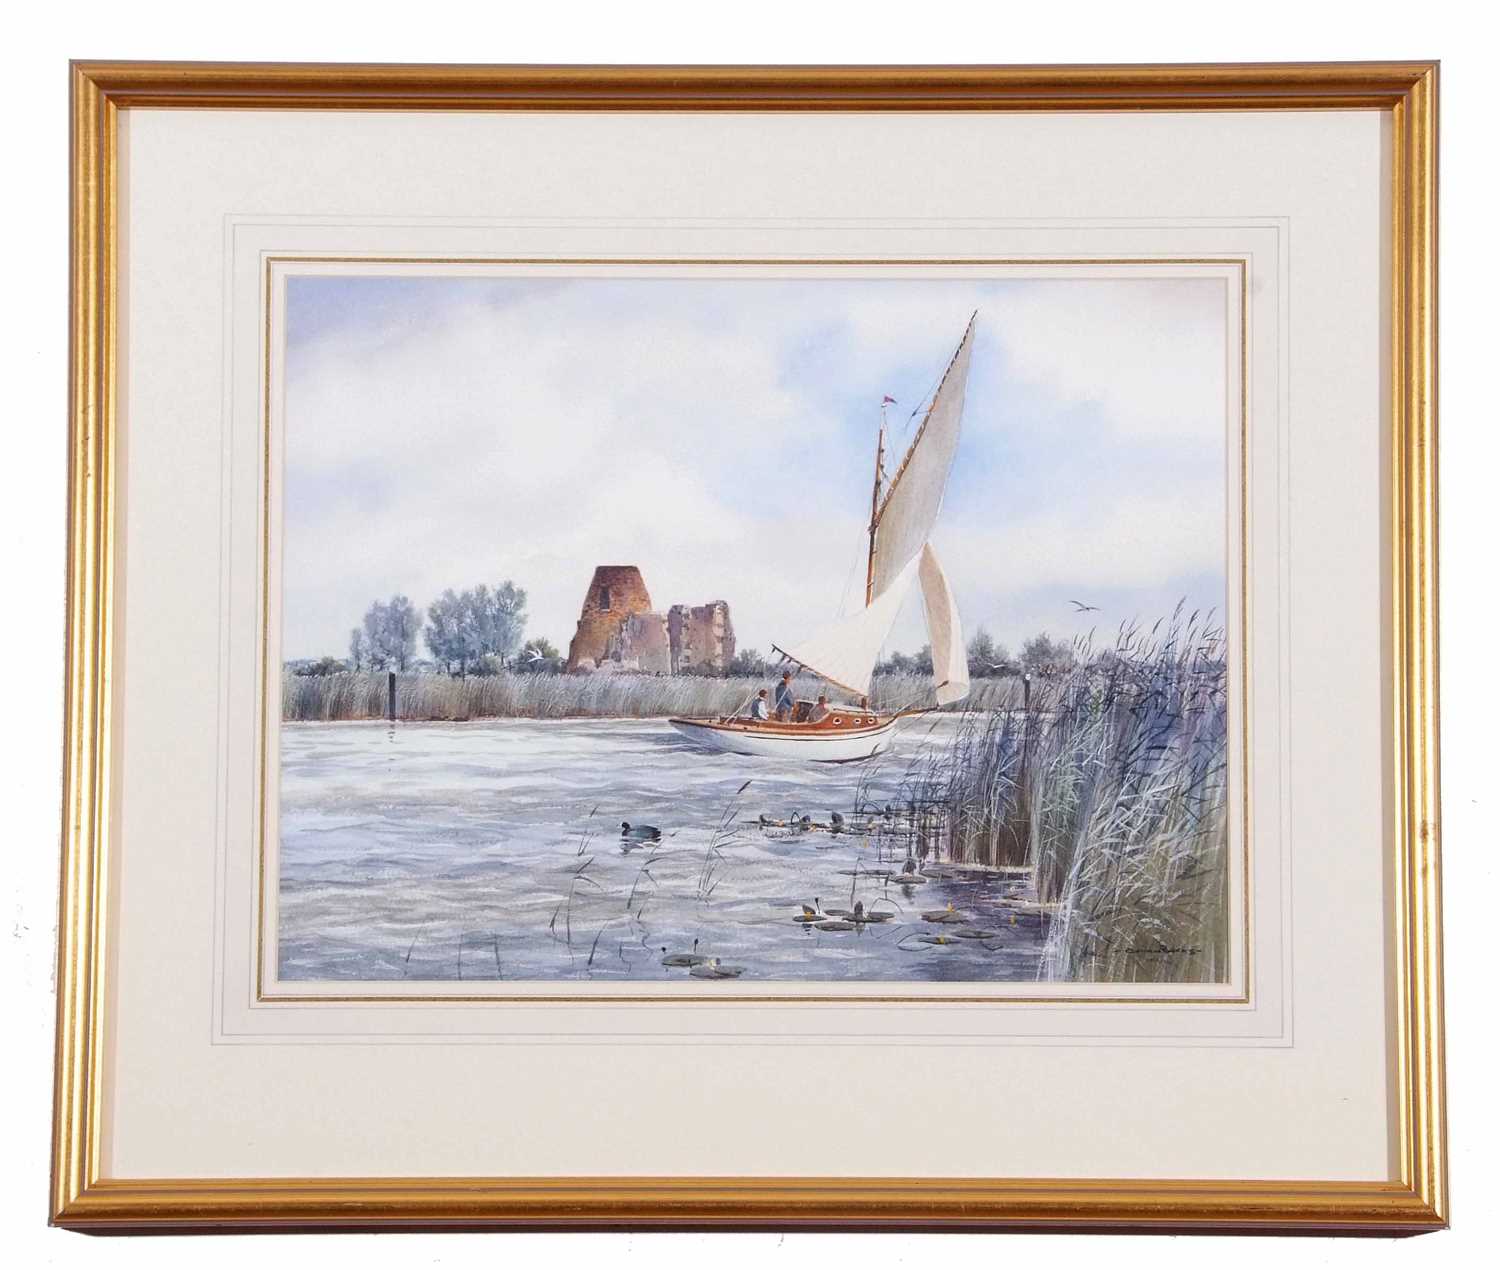 Colin W Burns (British, b.1944), 'Sailing Past St Benets', watercolour, signed. 12.5x16ins. - Image 2 of 2